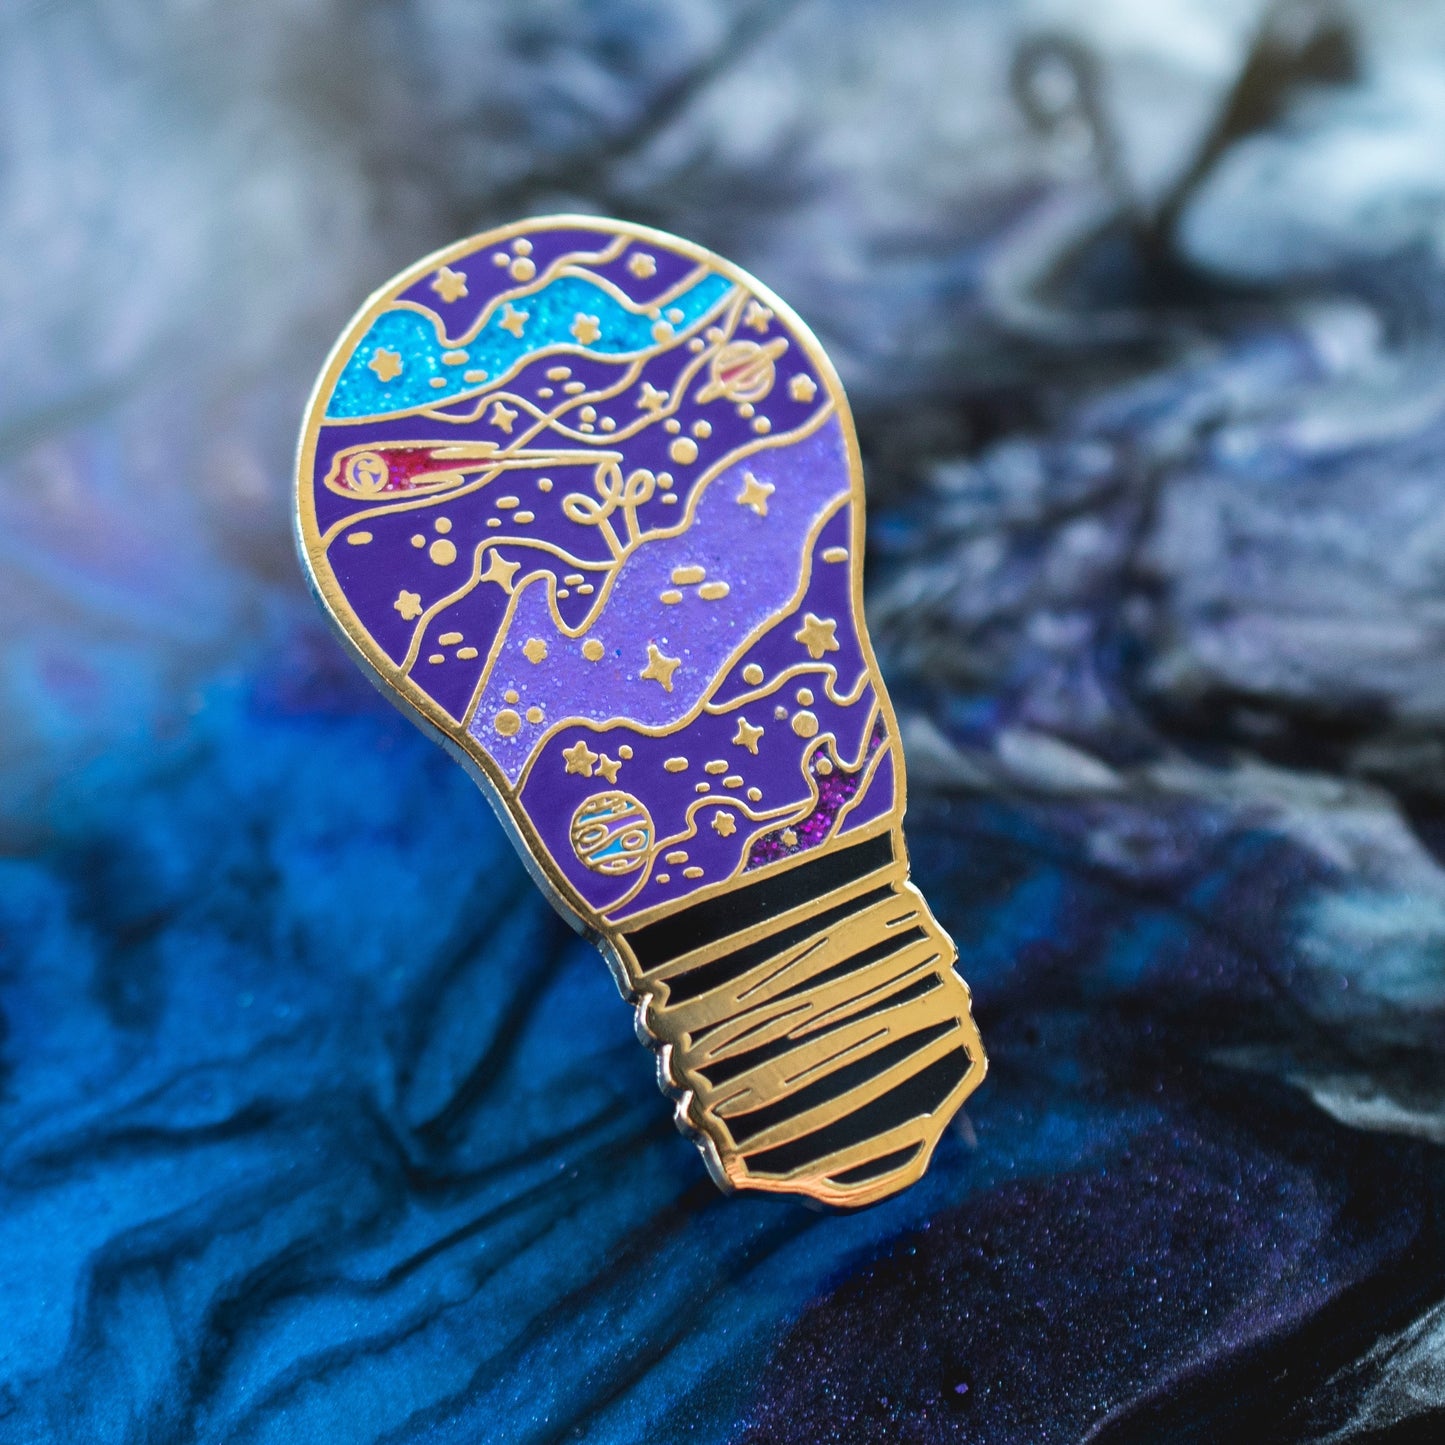 Light Up The Universe Pin